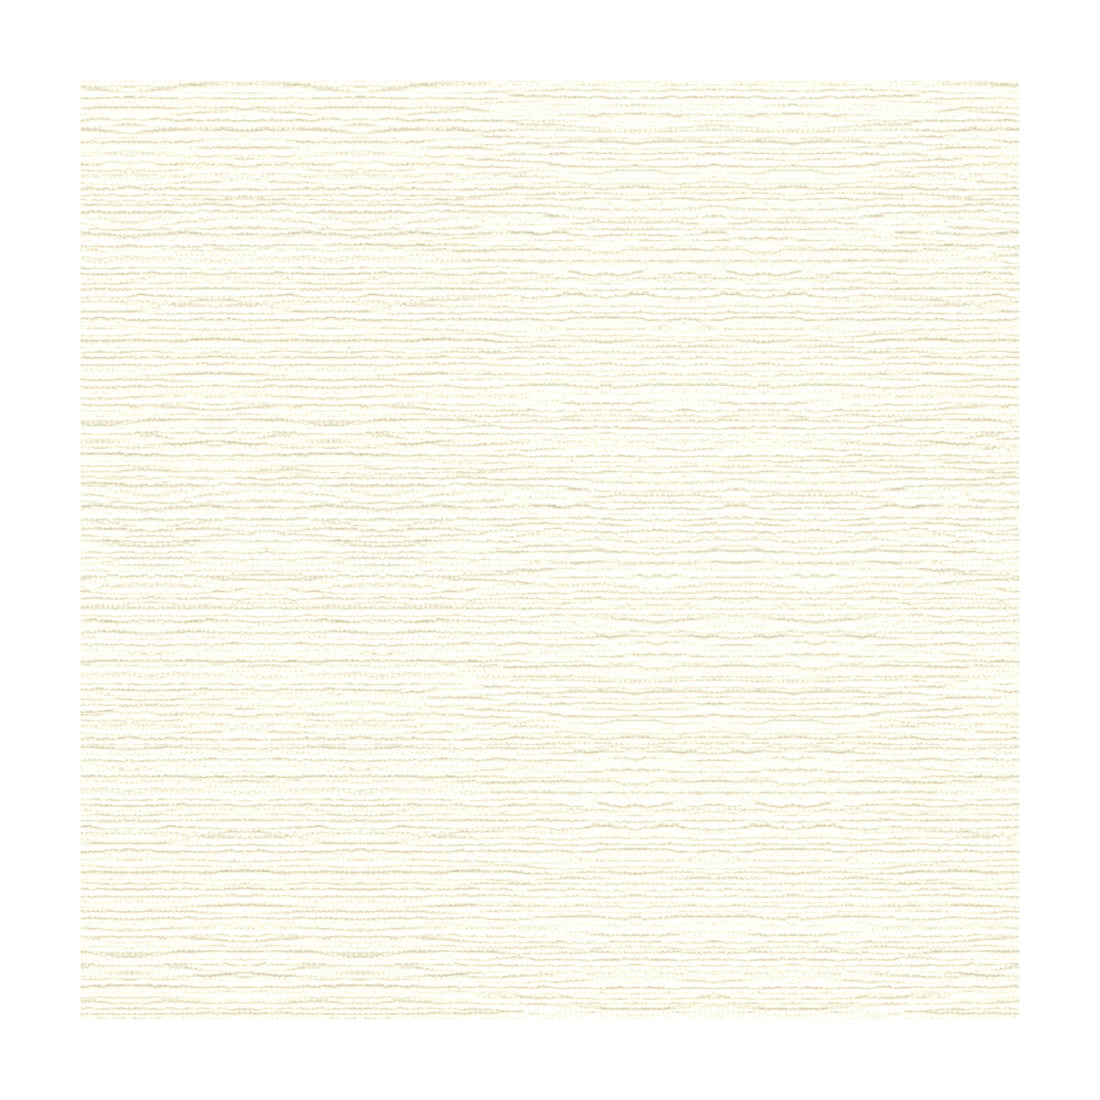 Penrose Texture fabric in white color - pattern 2015115.101.0 - by Lee Jofa in the Penrose Texture collection